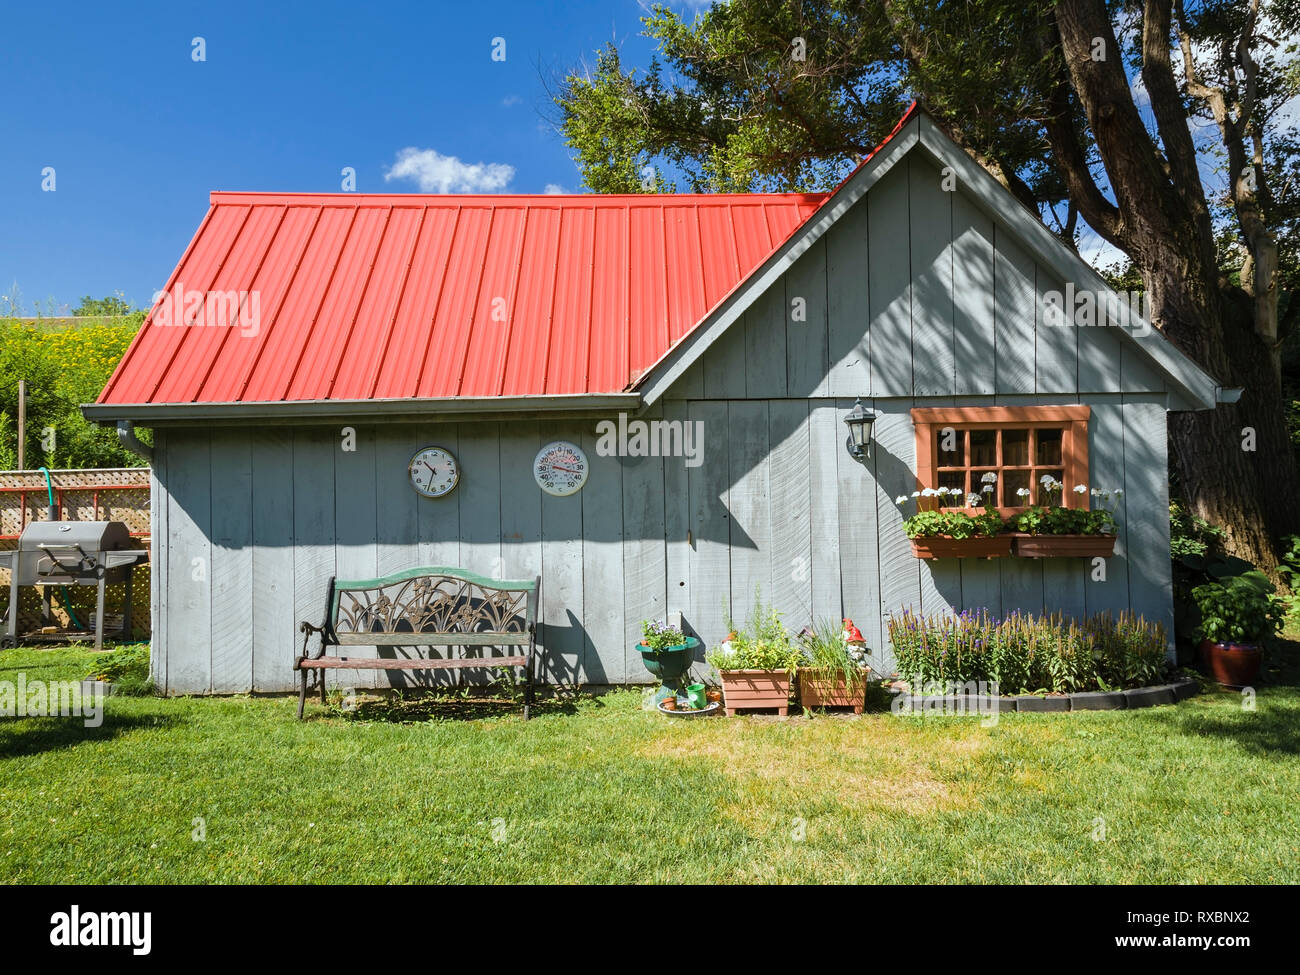 Old grey wood planked storage and garden shed with red standiing seam sheet metal roof in residential backyard in summer, Quebec, Canada. This image is property released. CUPR0329 Stock Photo